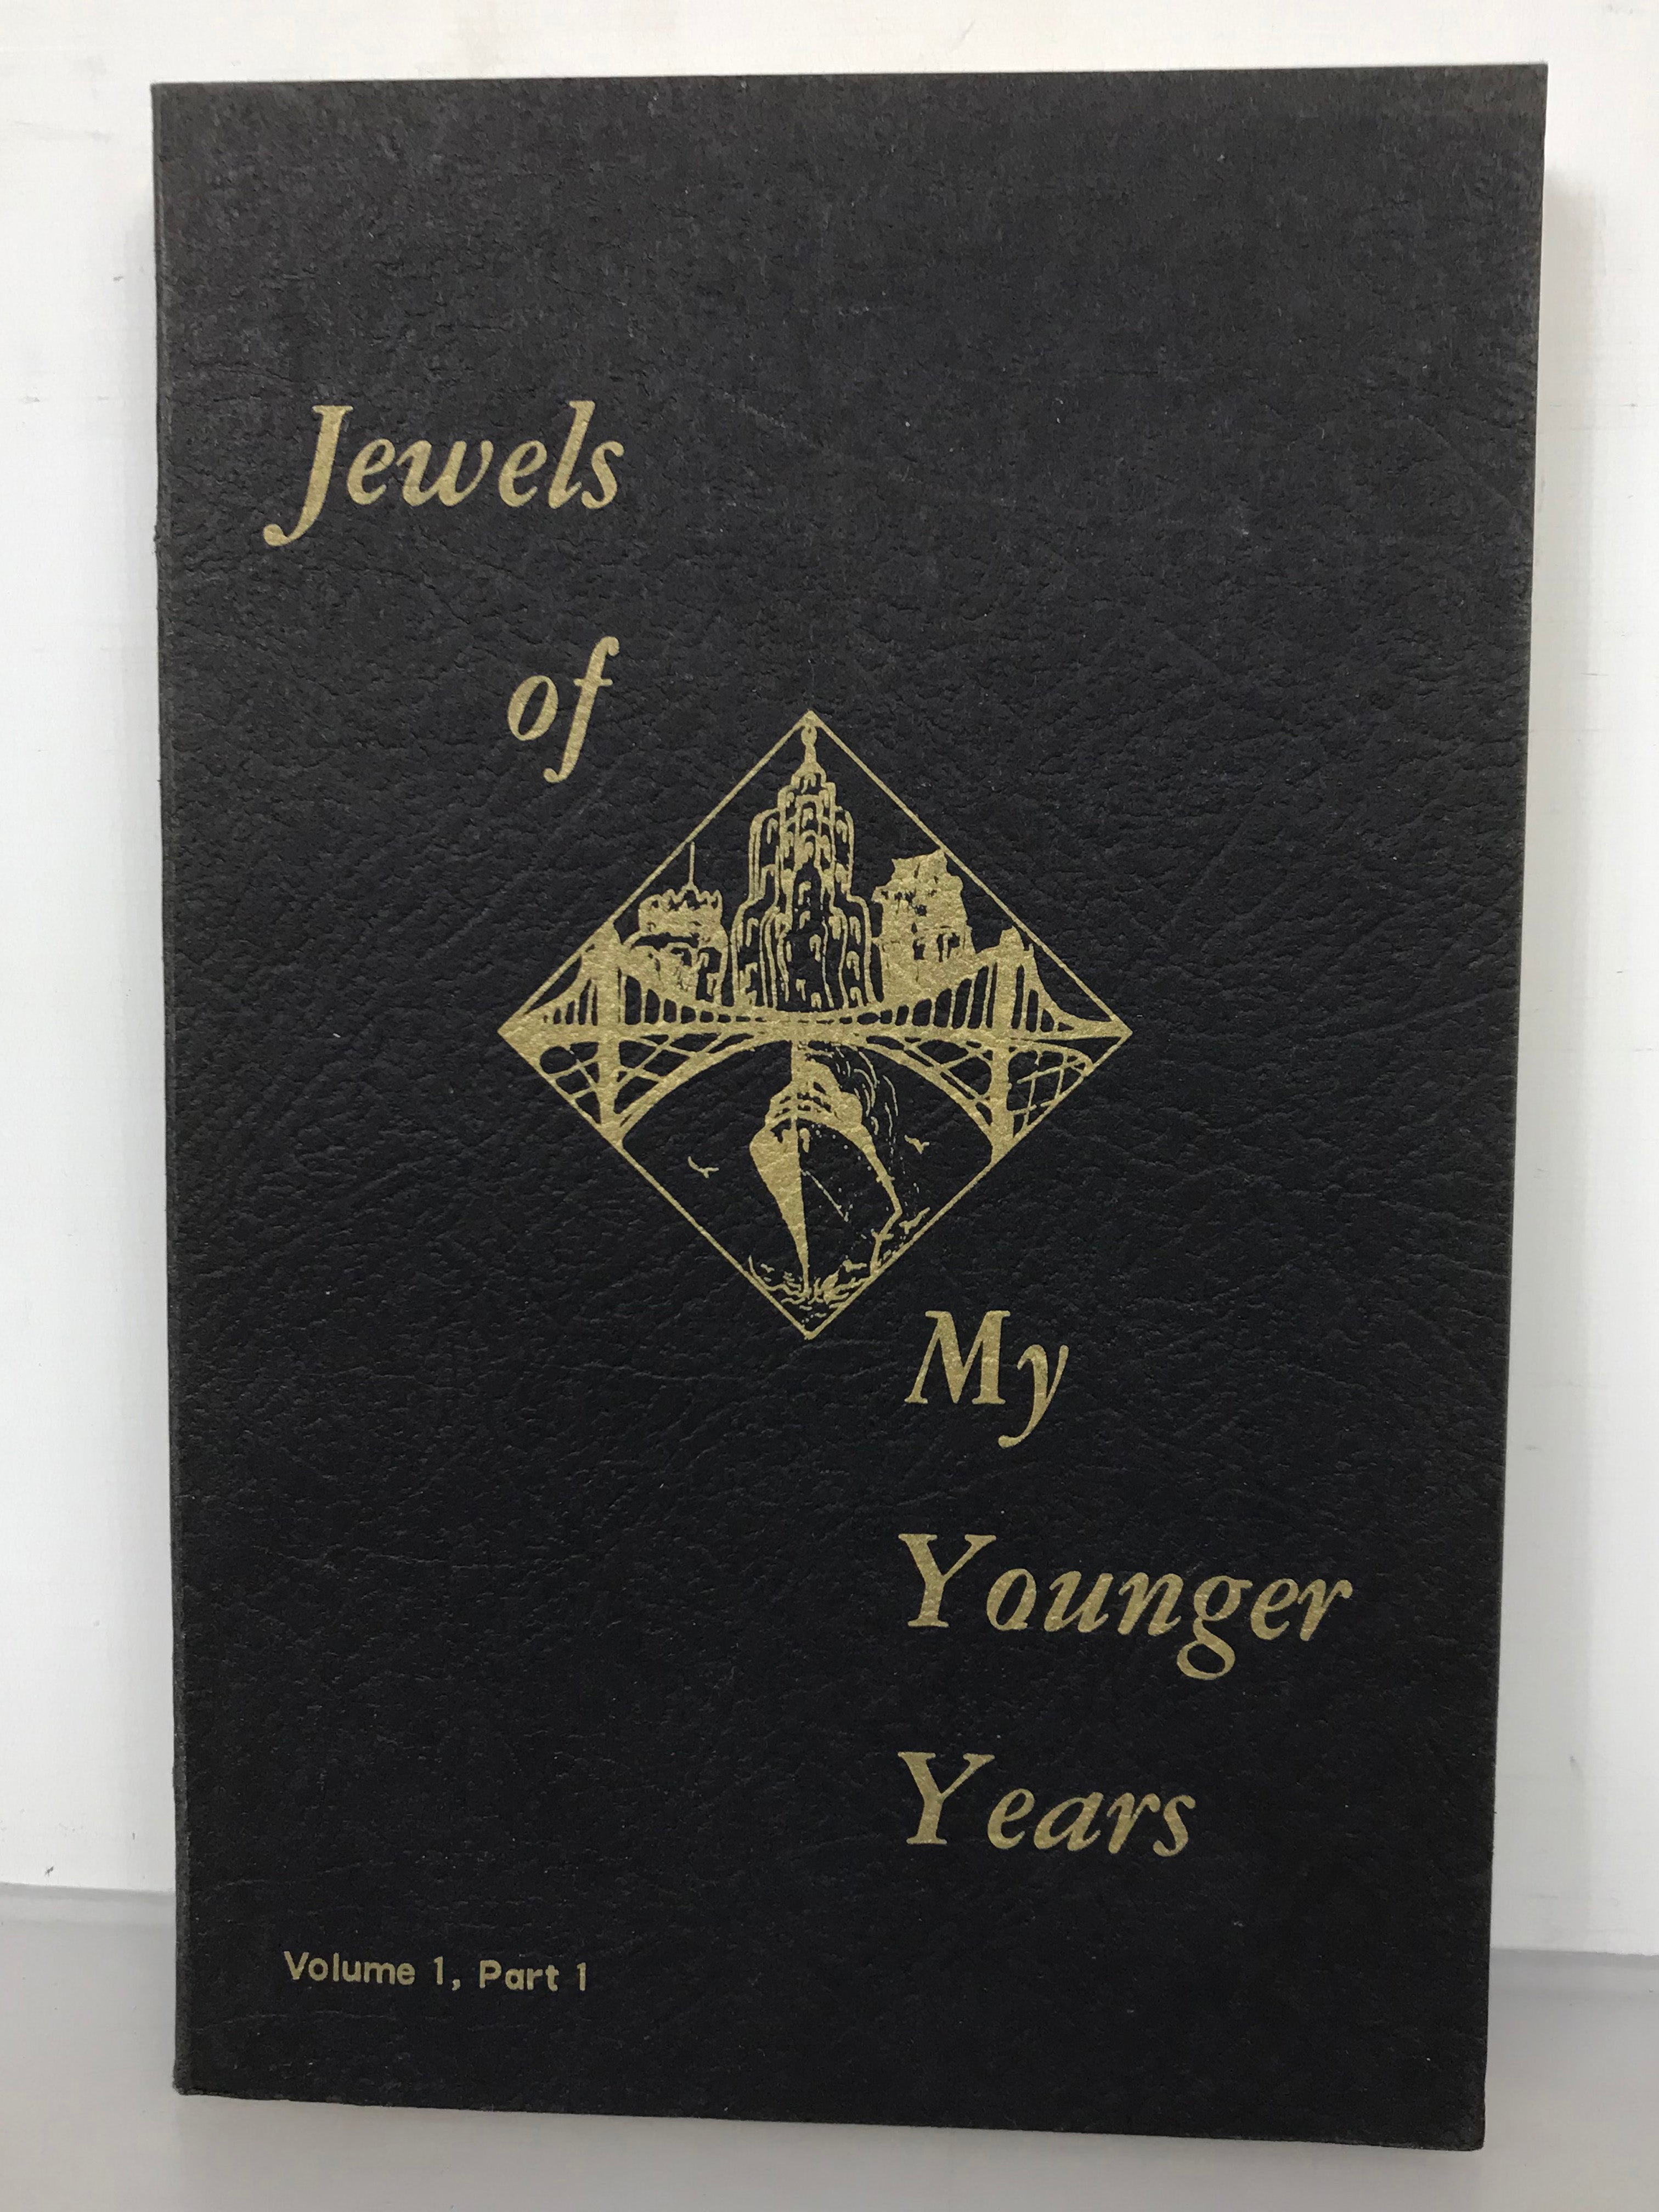 Jewels of My Younger Years by John W Fields 1964 Lansing Michigan Poetry